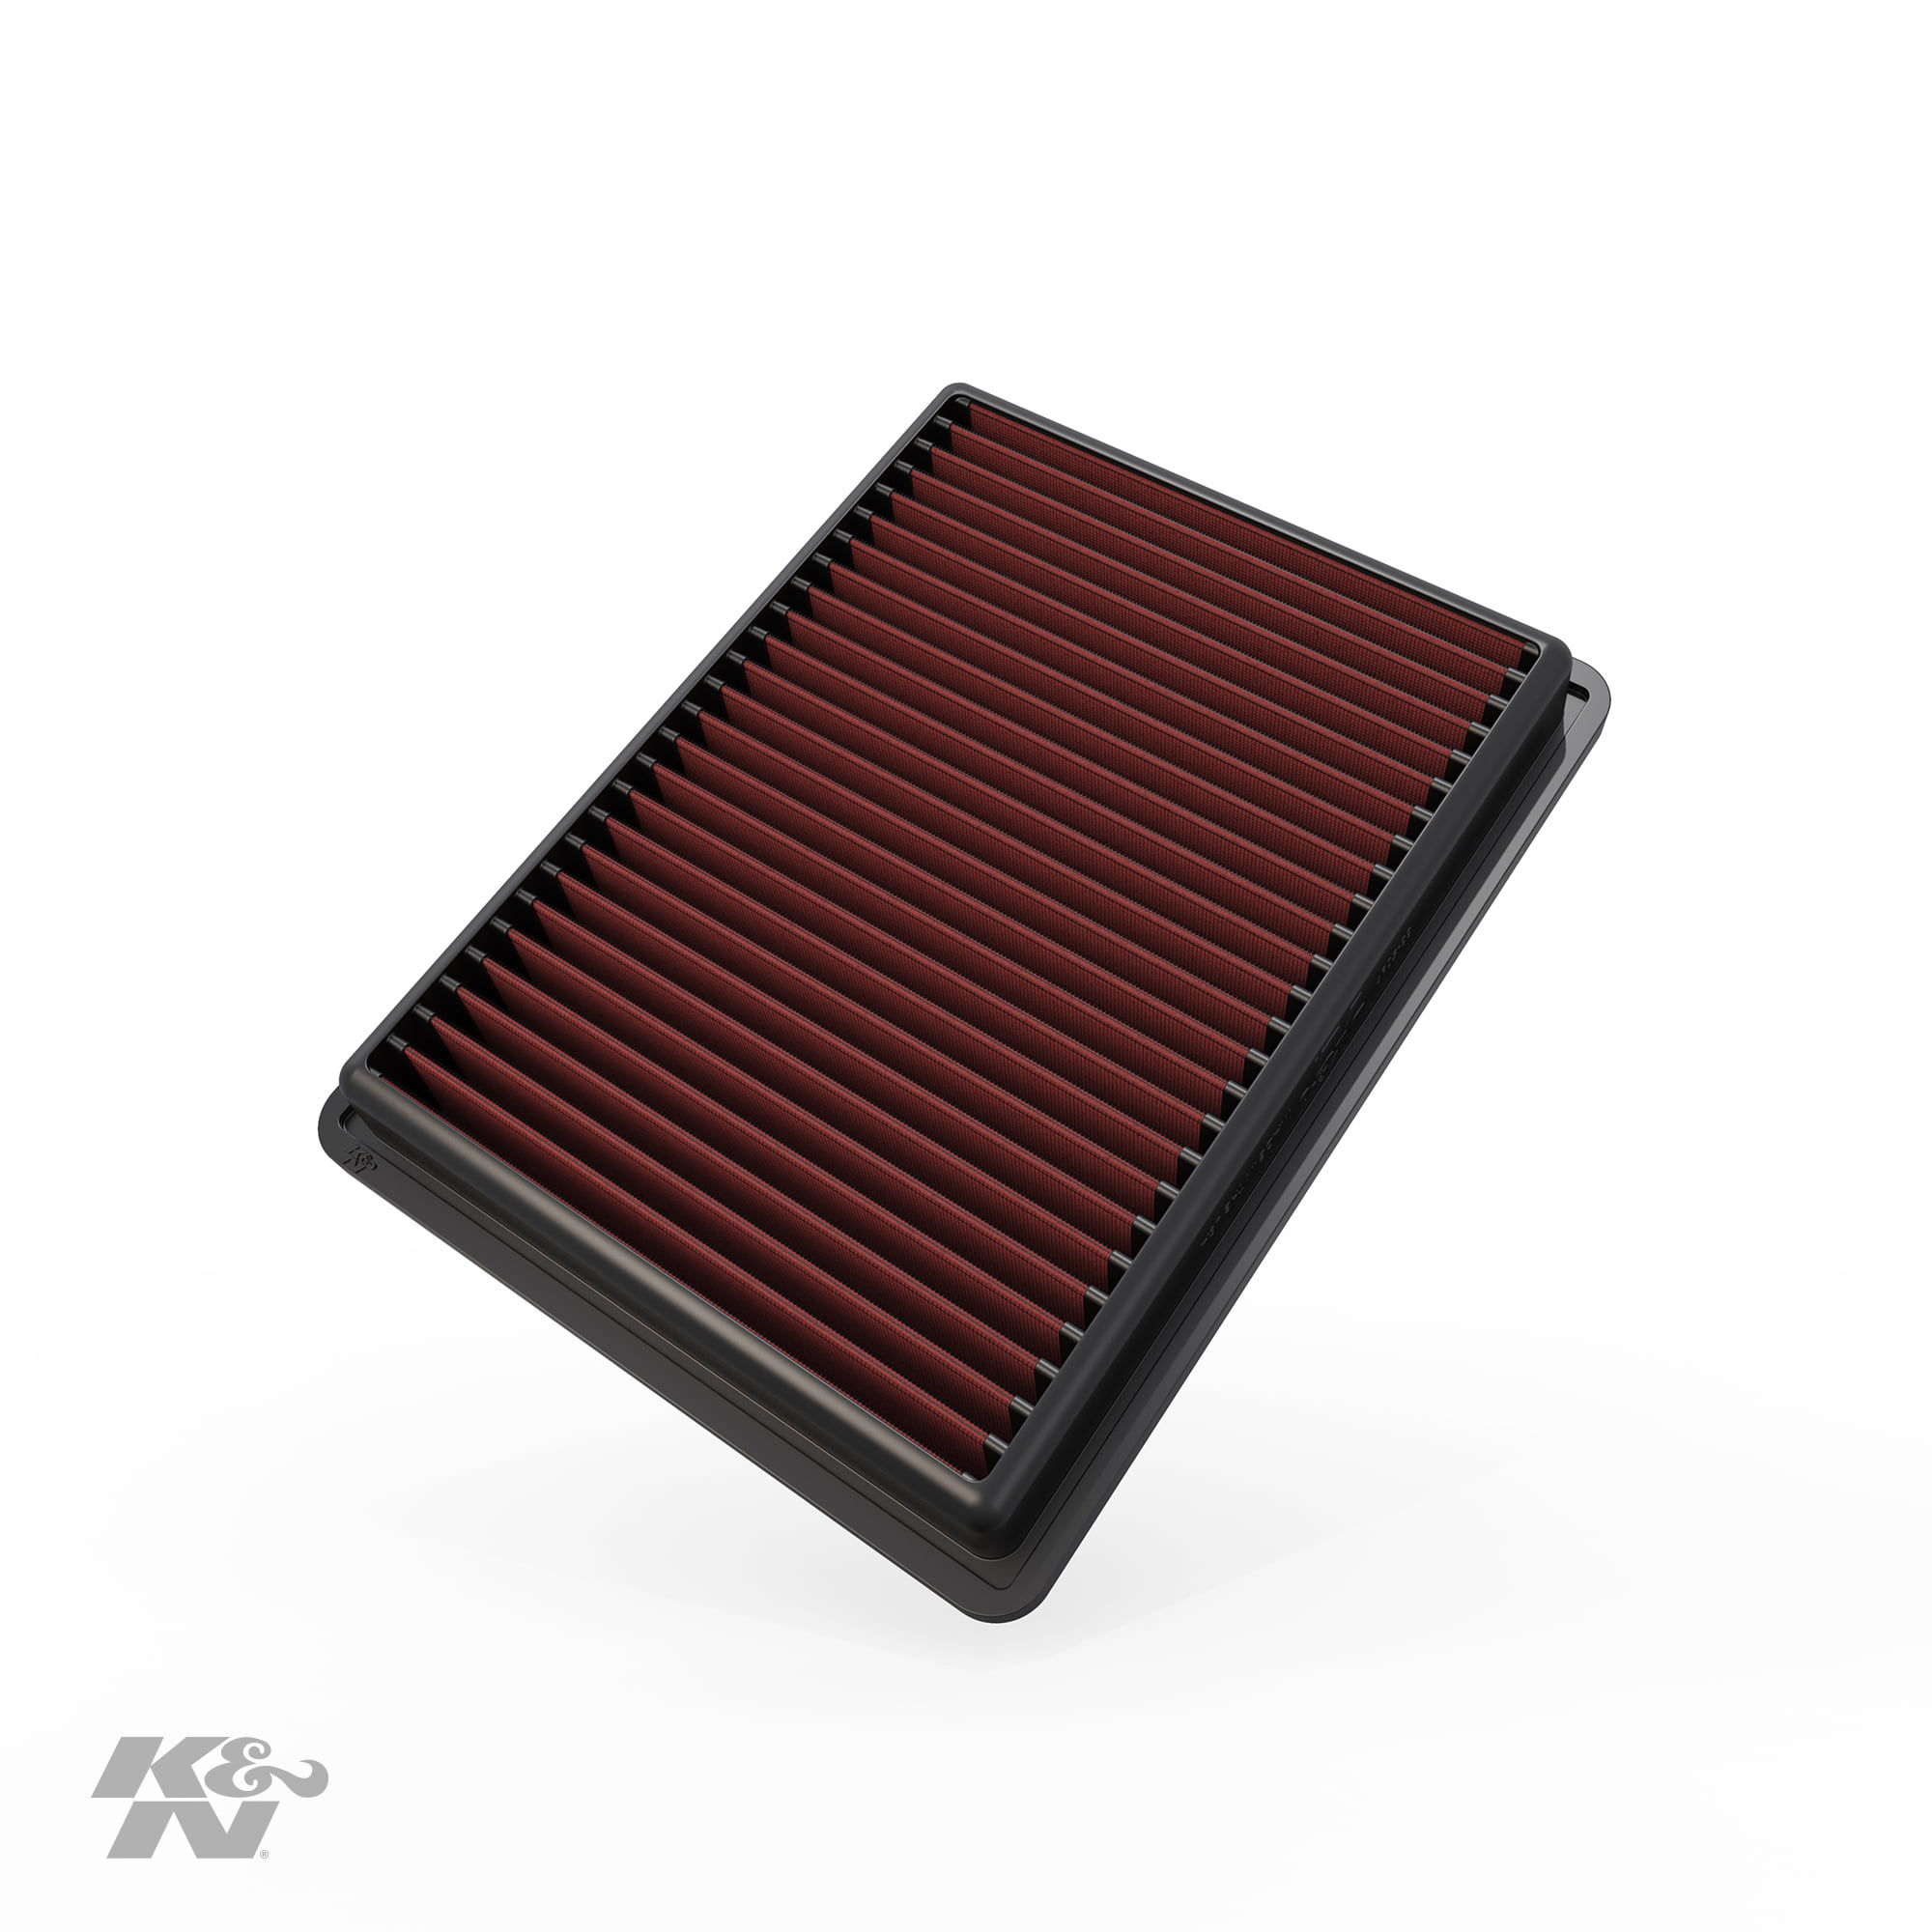 K&N Engine Air Filter: High Performance, Premium, Washable, Replacement Filter: 2018-2019 Chevy 2018 Gmc Terrain Cabin Air Filter Replacement